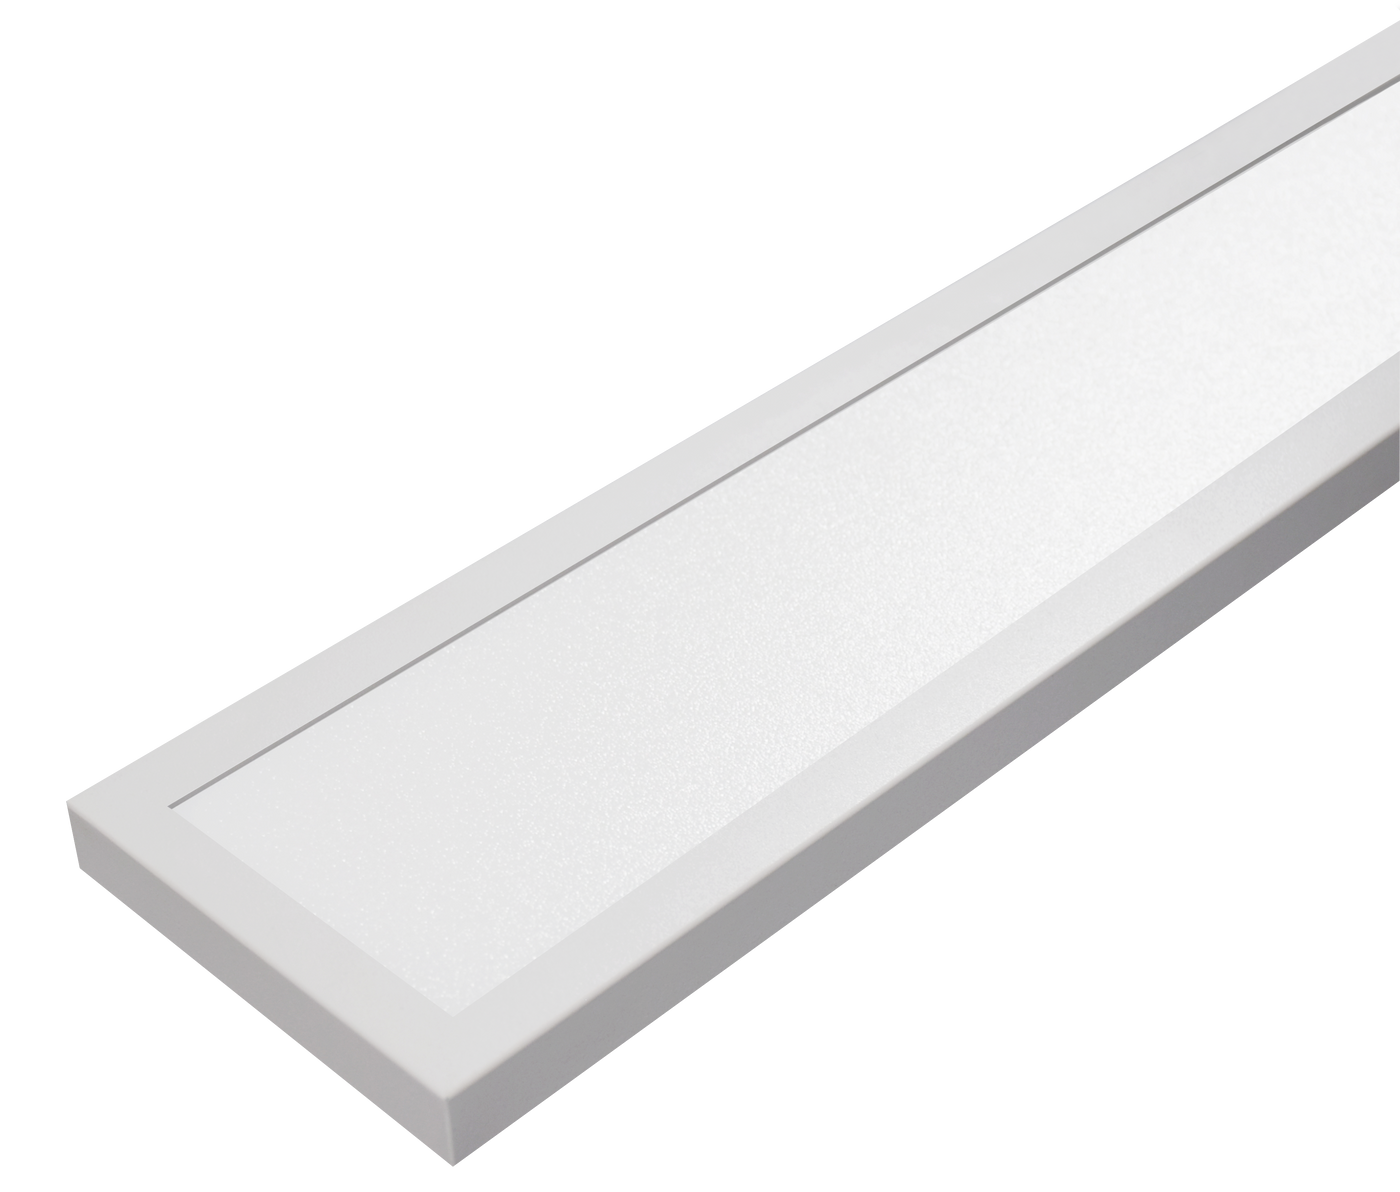 8FT Slim 6" Linear Recessed Light, 3800 Lumen Max, Wattage and CCT Selectable, 110-277V